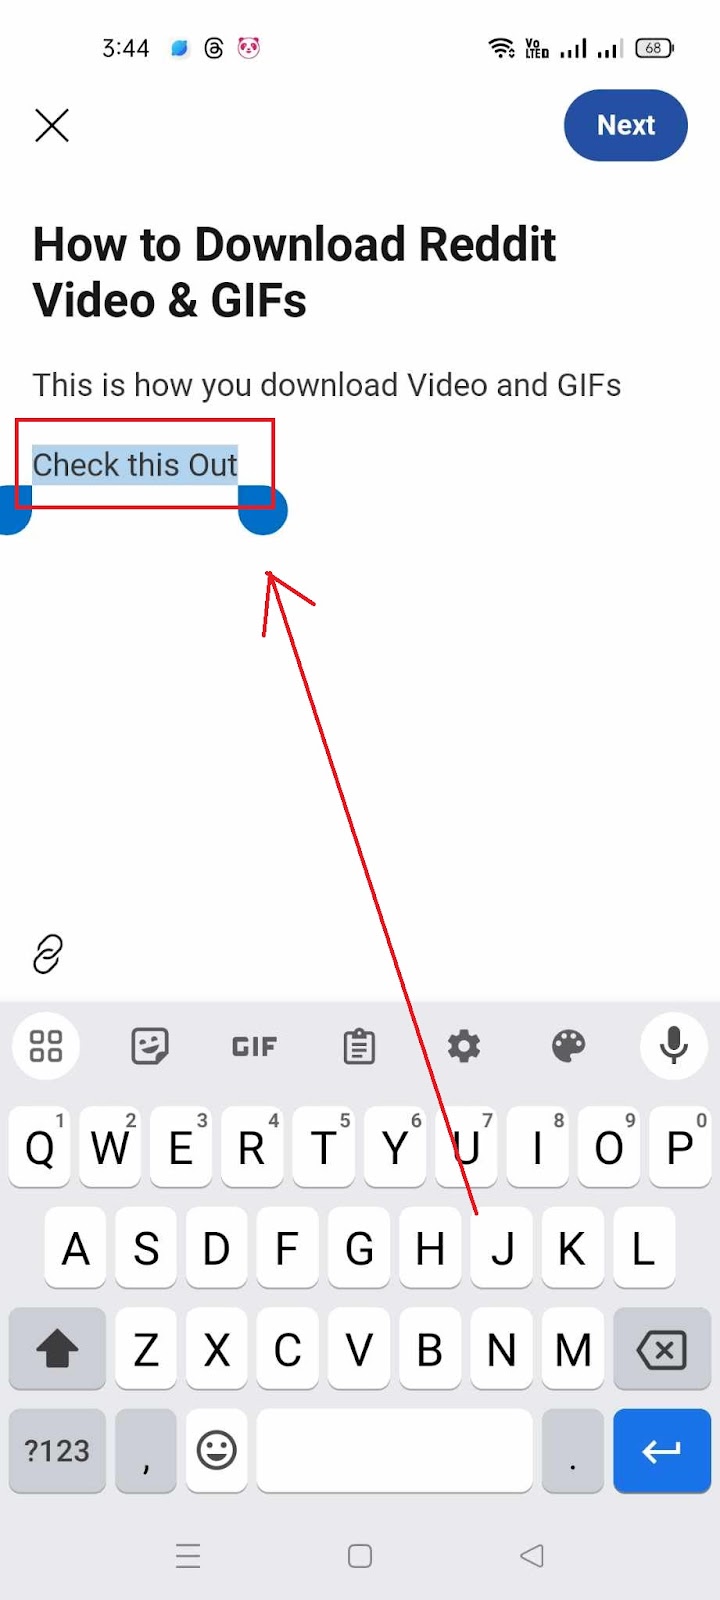 How to Add Links into Reddit Post and Comments - Highlight the Text you Want